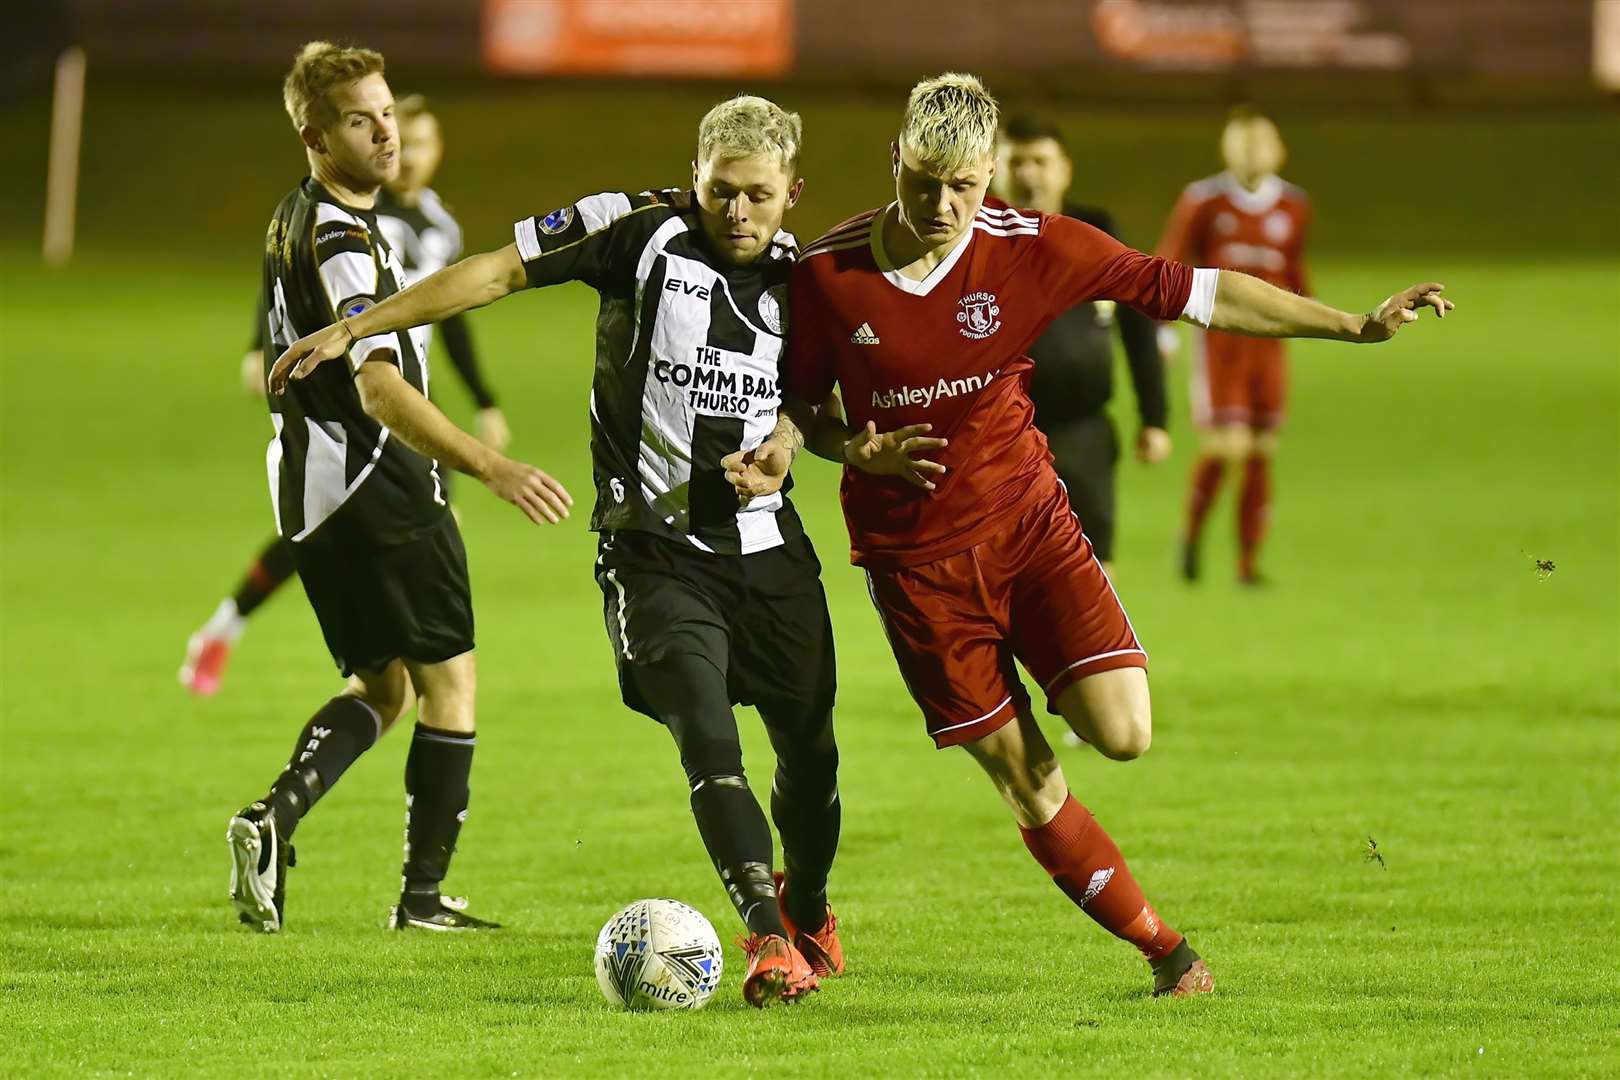 Wick Academy's Jack Henry and Thurso's Kuba Koziol during the midweek friendly at Harmsworth Park which the Scorries won 6-0. Picture: Mel Roger